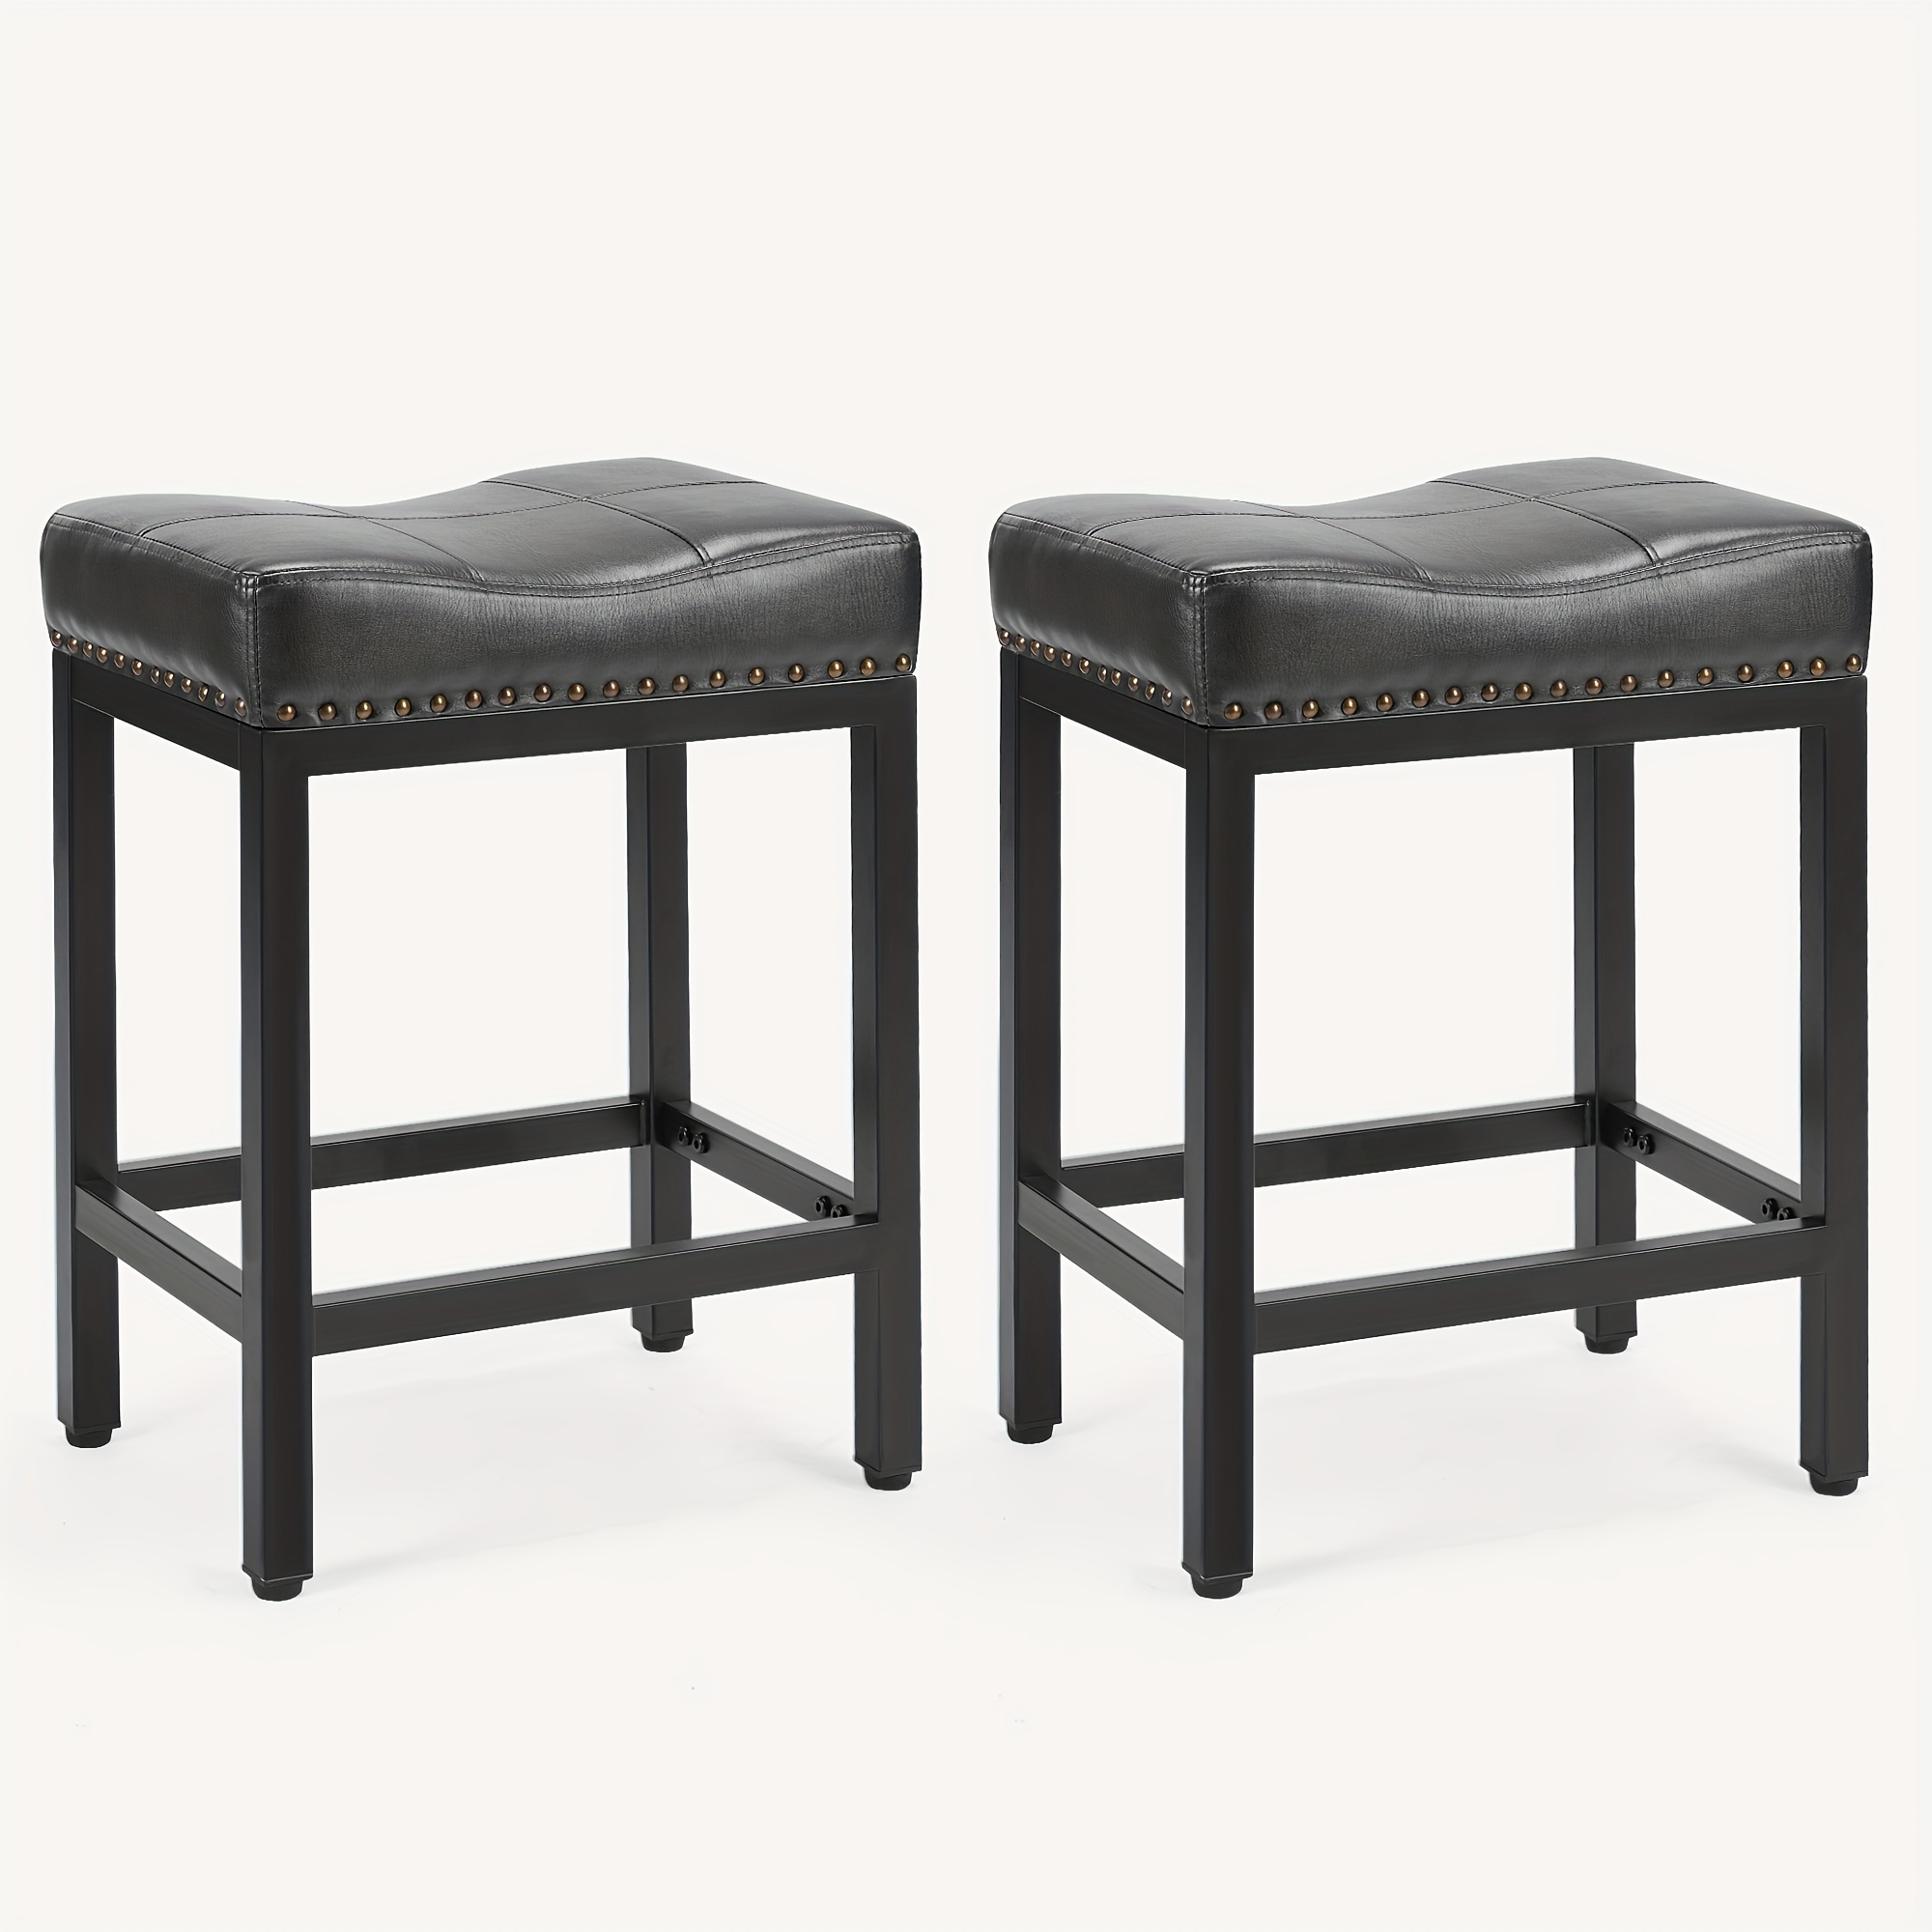 

Upholstered Stools Of 24-inch Counter Height With Metal Base, Crafted From Pu Leather, Perfect For Kitchen Island